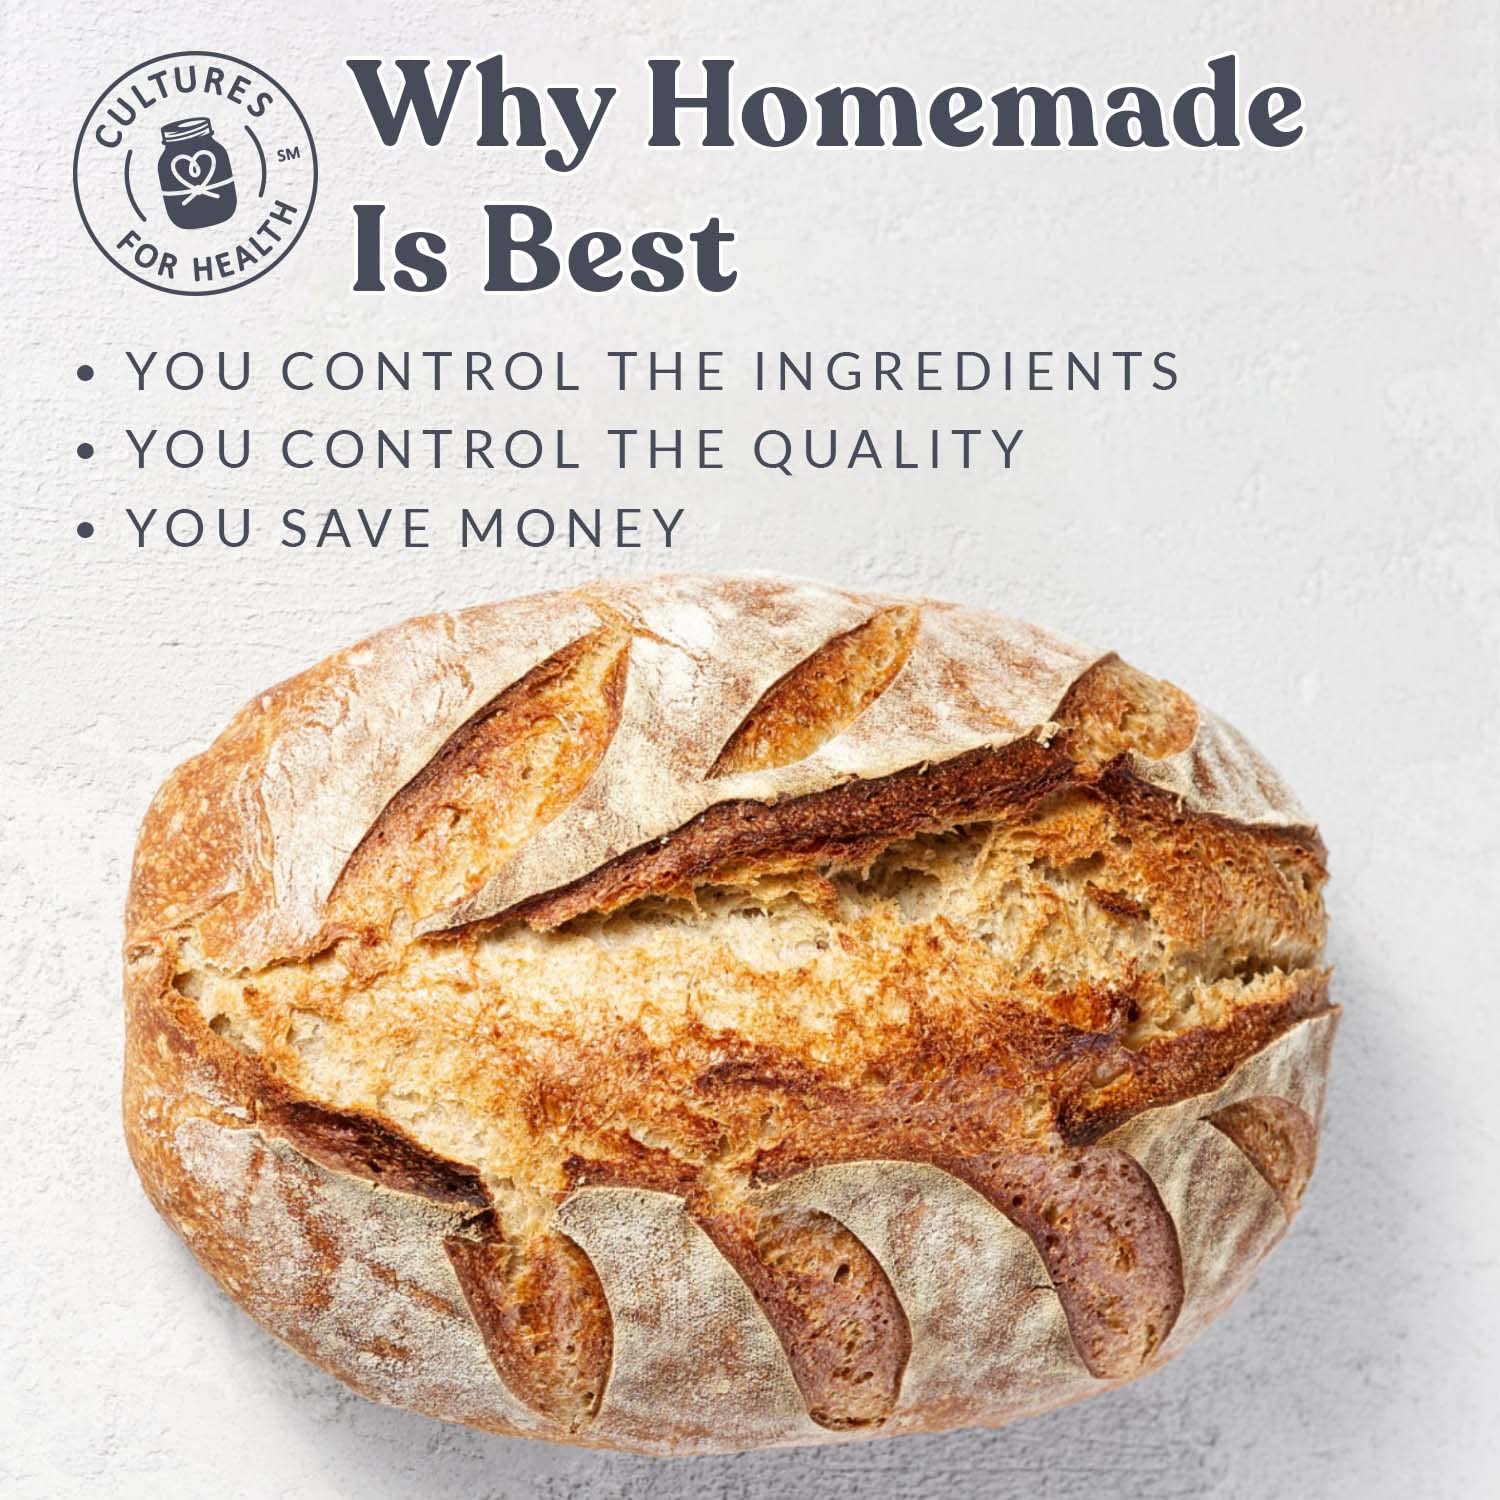 Cultures for Health Whole Wheat Sourdough Starter | Dehydrated Heirloom Culture for DIY Artisan Bread | Perfect for Muffins, Pancakes, Whole Wheat Pasta, & More | Non-GMO Prebiotic Sourdough Bread : Grocery & Gourmet Food